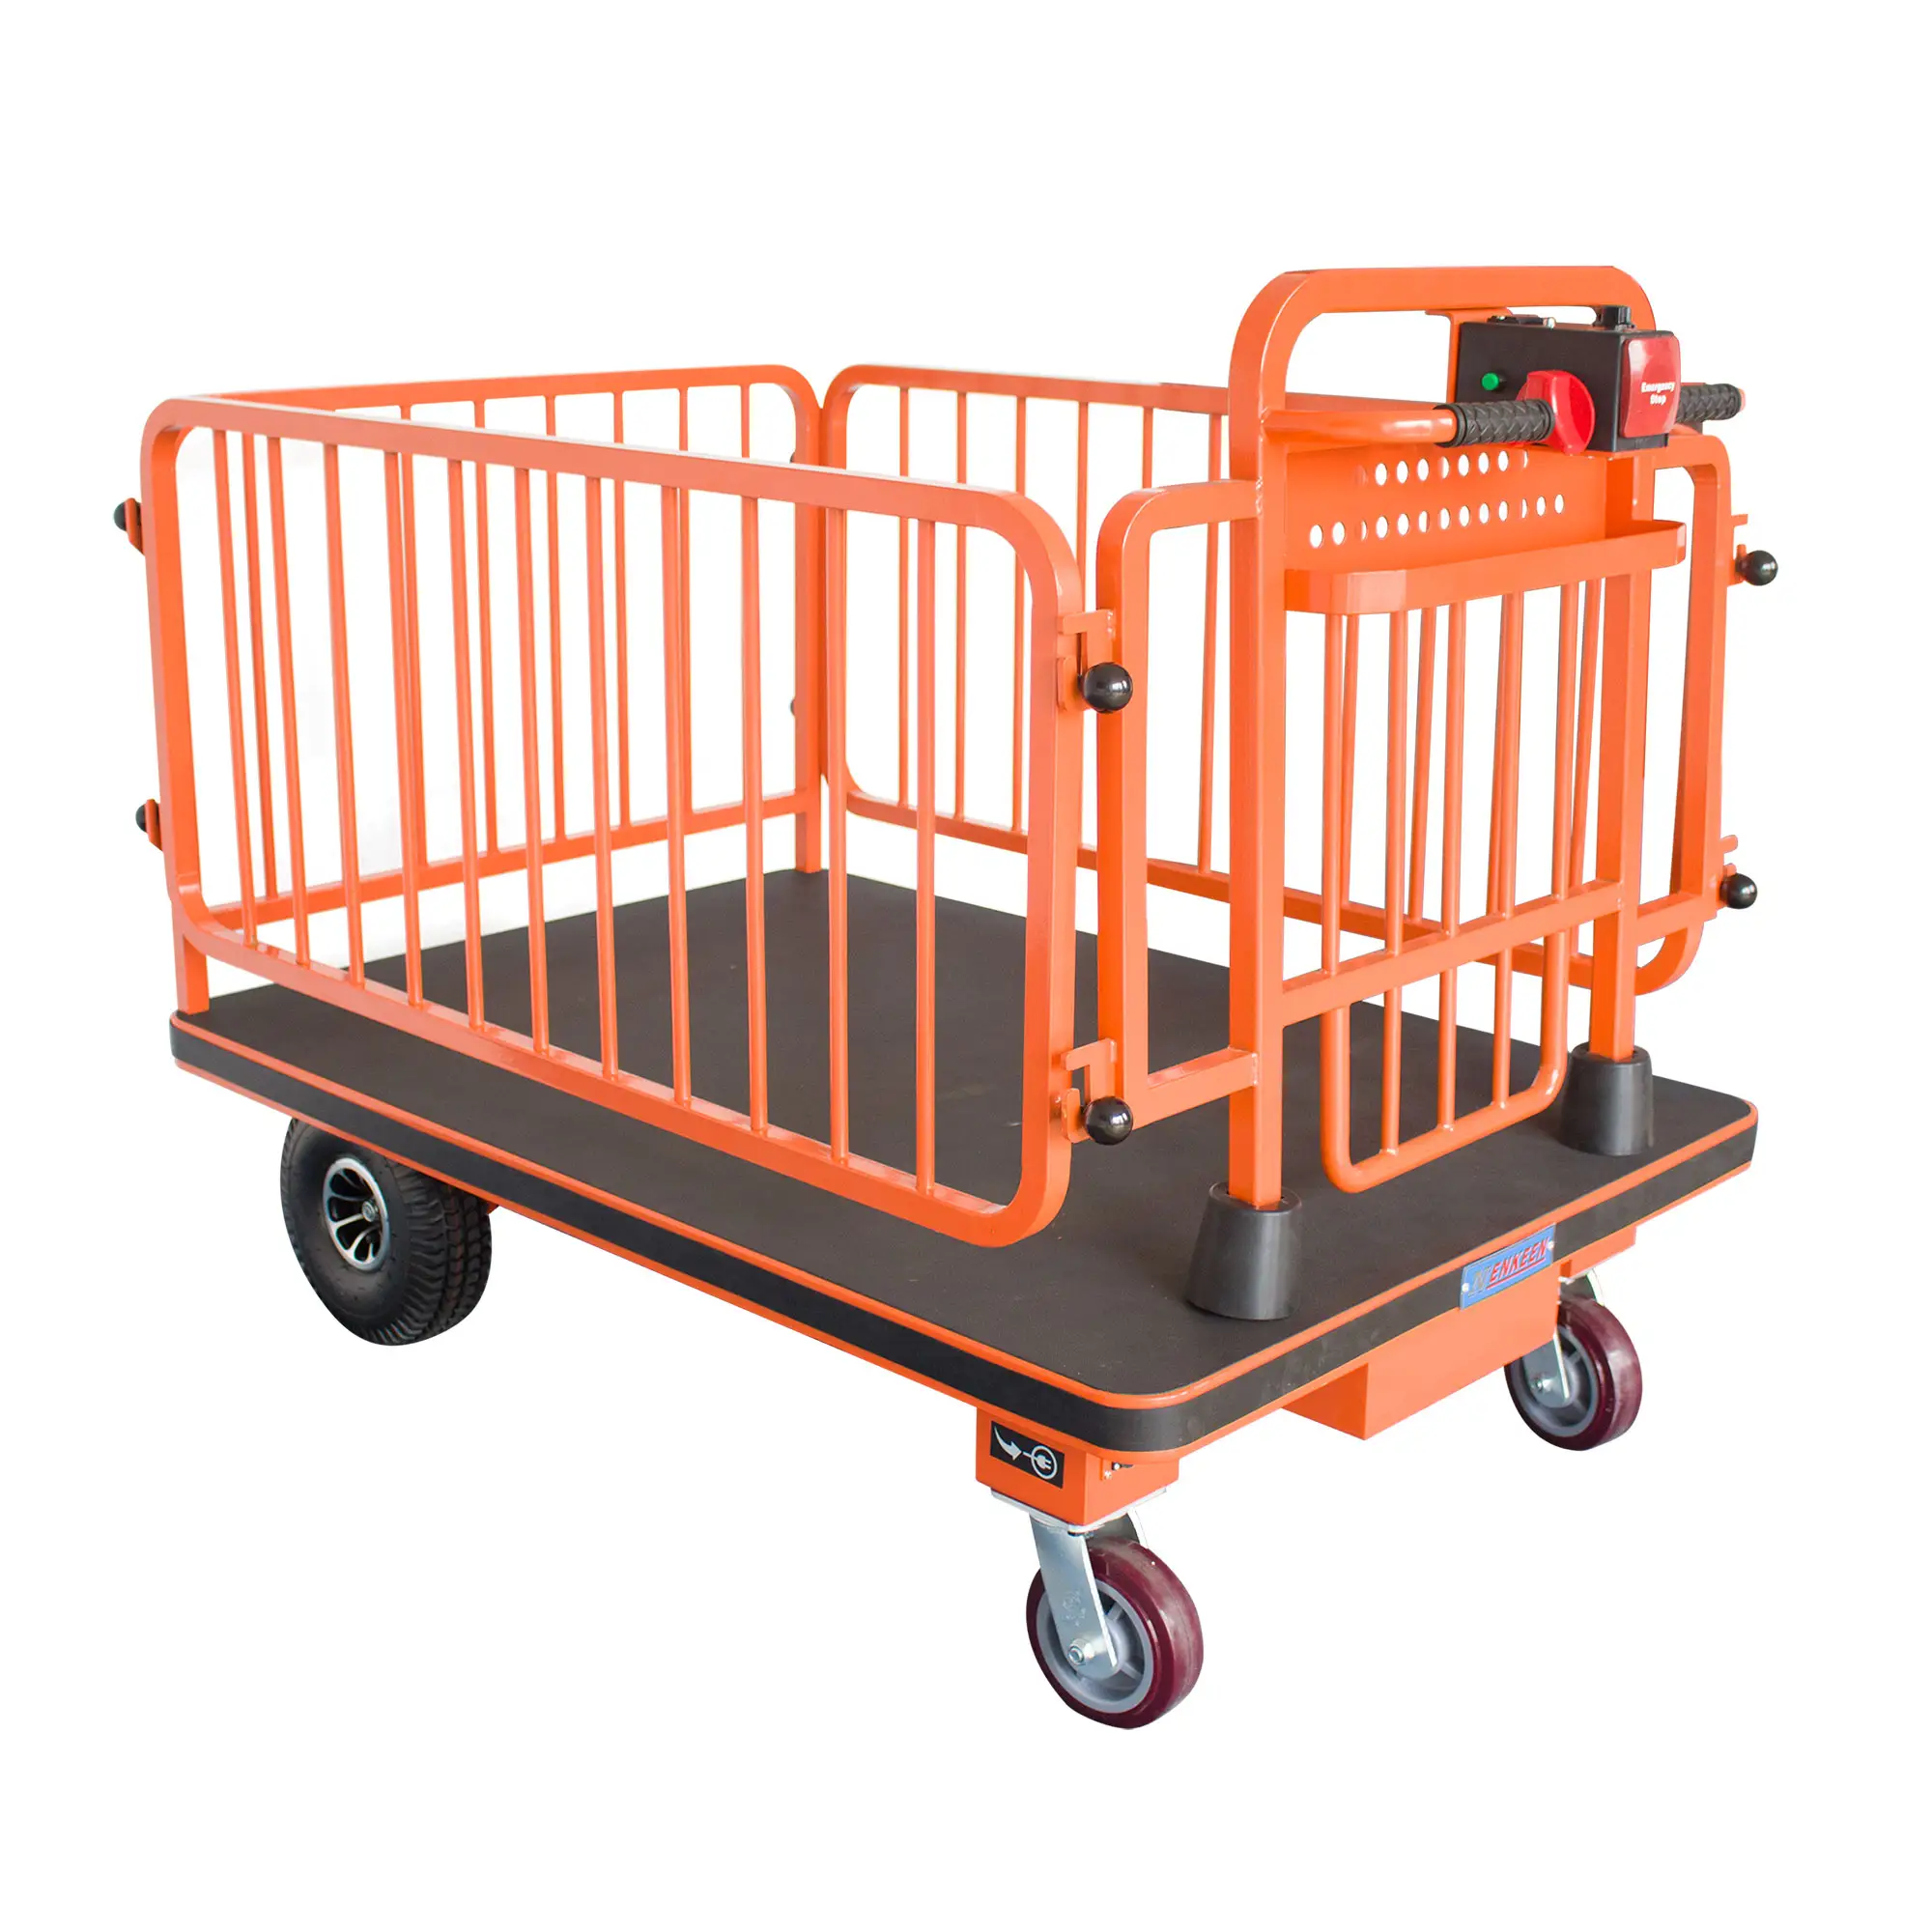 NK 117 Hot Selling Electric Hand Truck Trolley With Wholesale Price